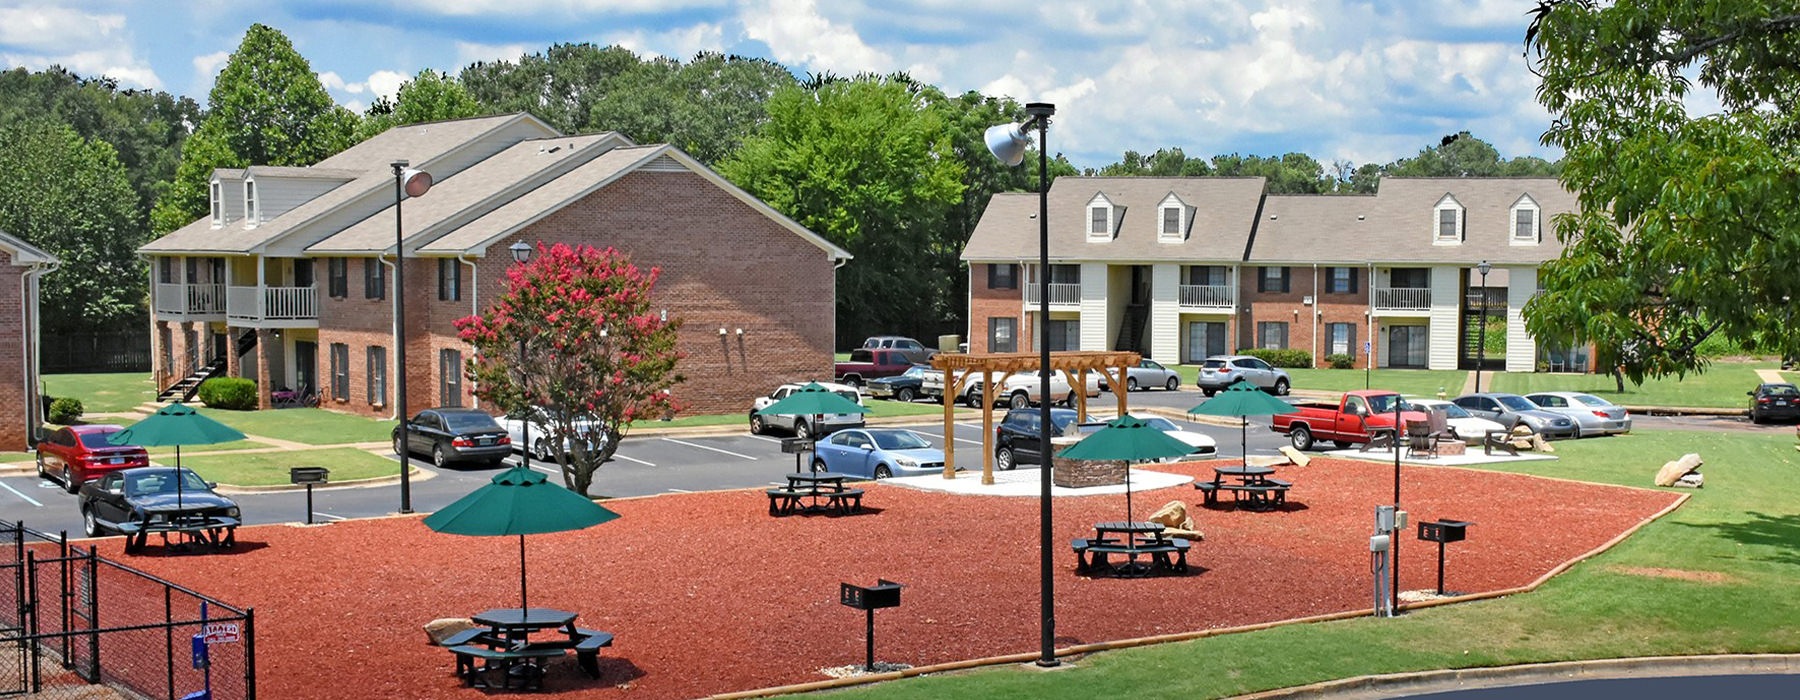 Summerchase at Prattville Apartments with a large courtyard and picnic tables